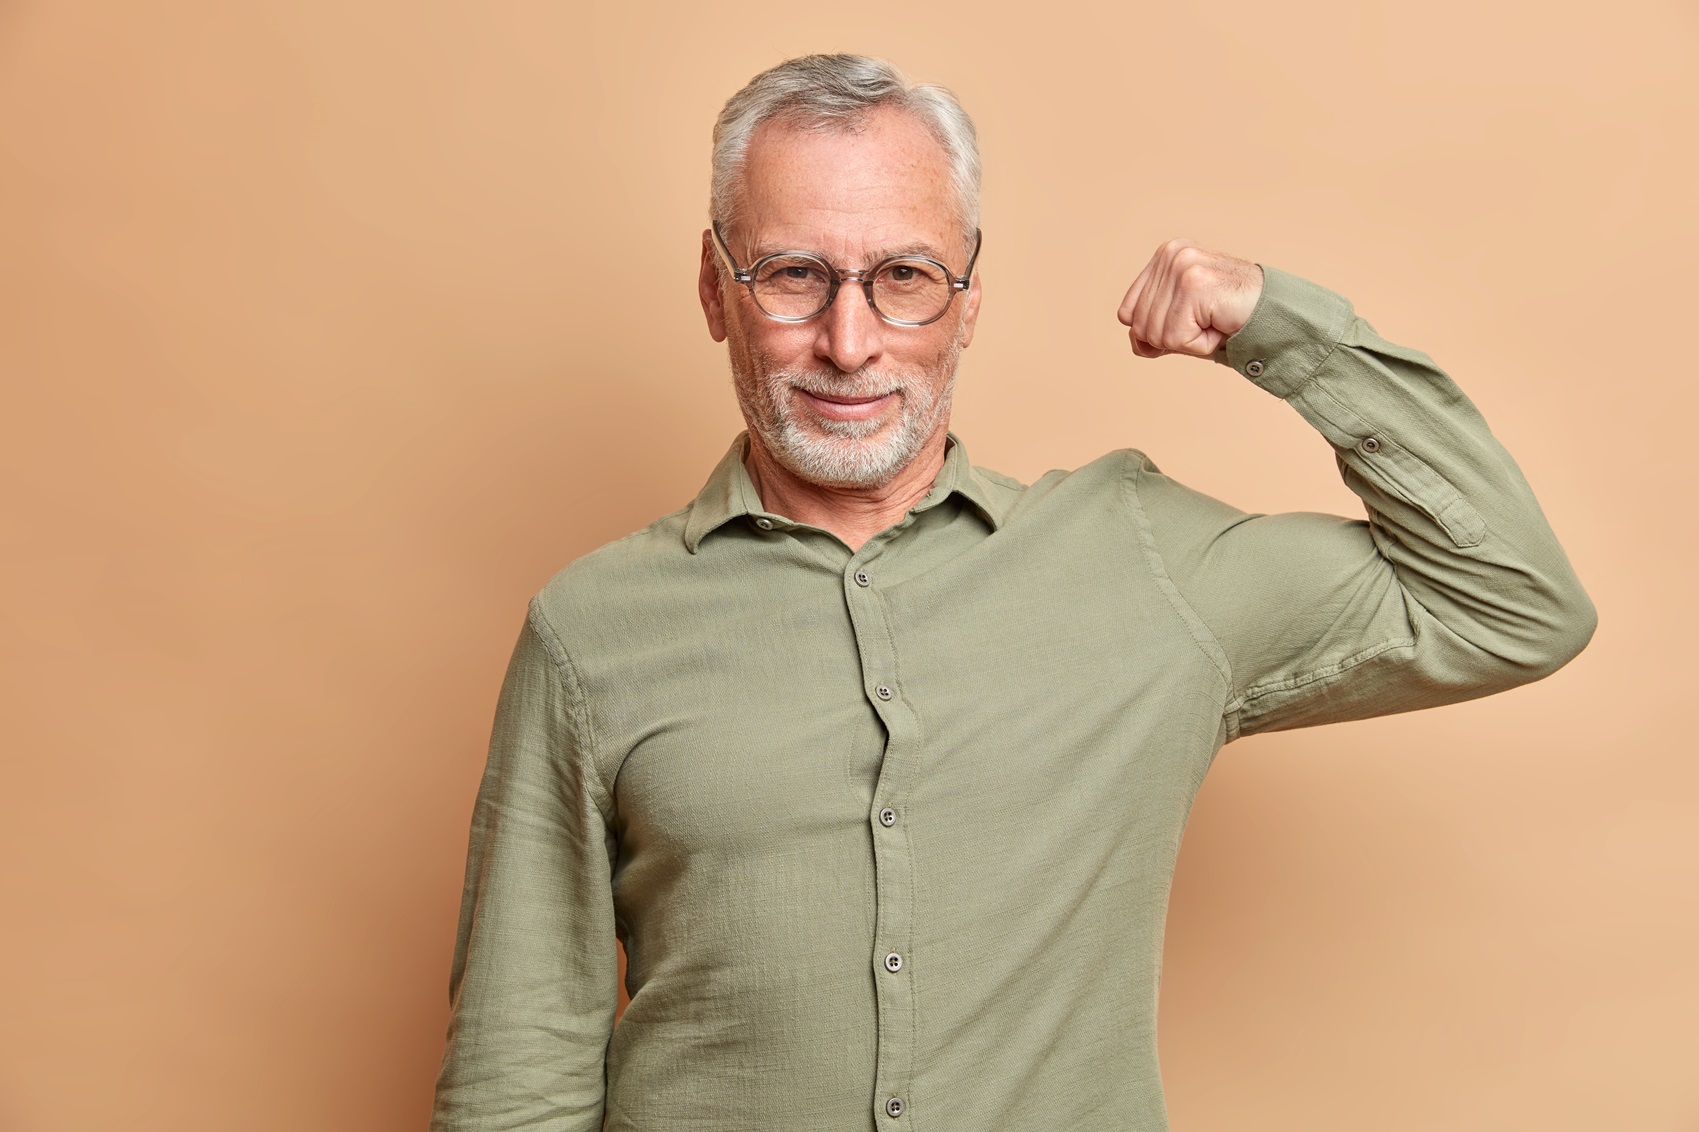 self confident serious man raises arm shows muscles being confident in his strength wears formal shirt poses against brown background. healthy handsome european pensioner demonstrates biceps